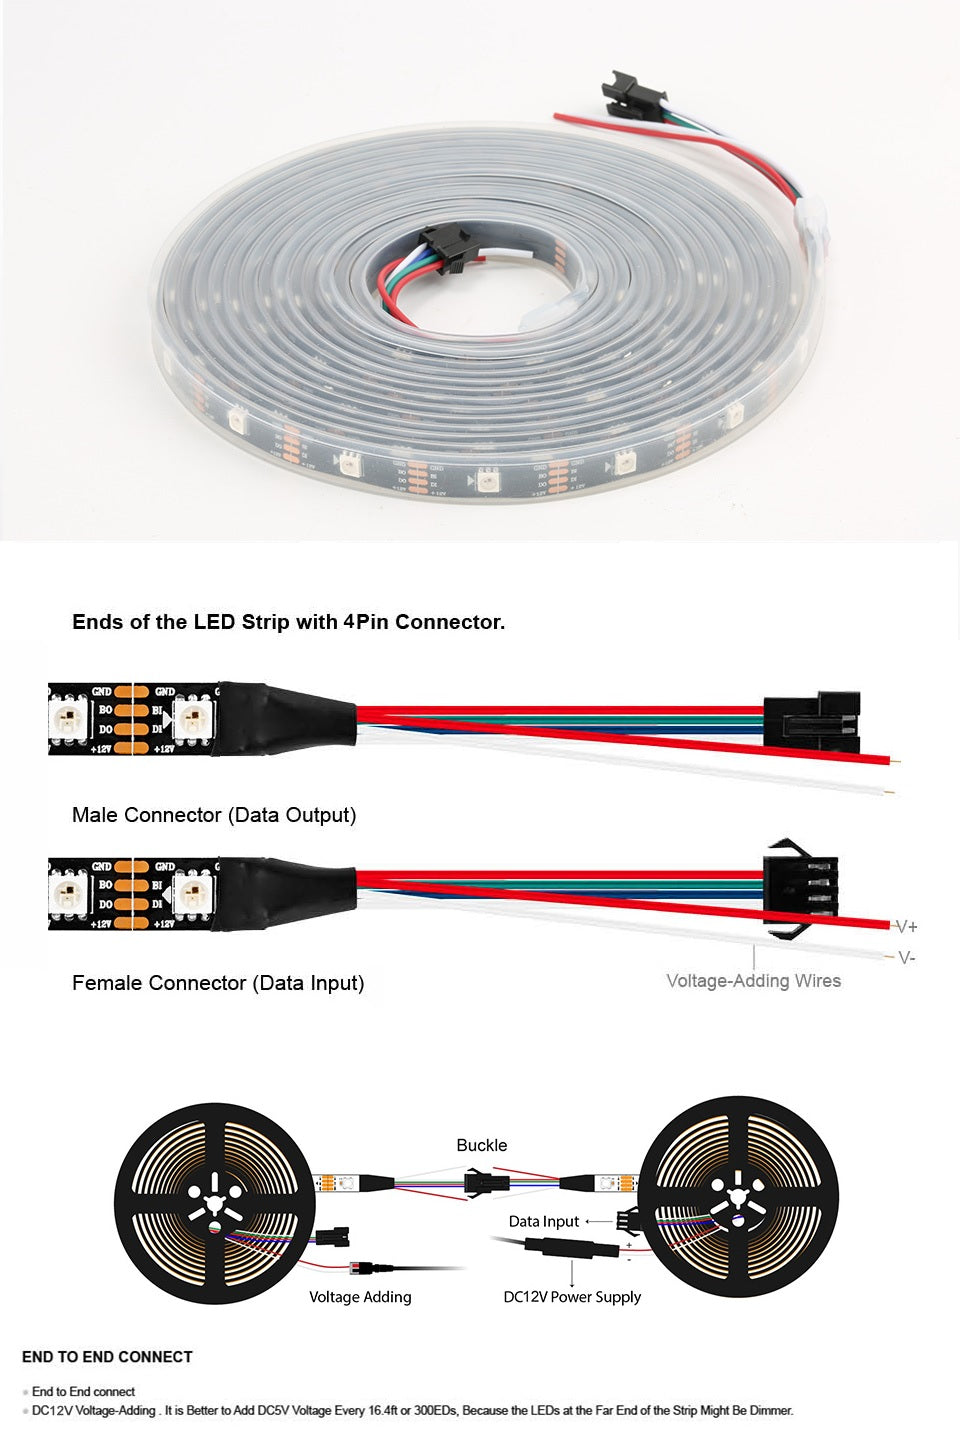 12V WS2815 Neopixel Programmable RGB LED Strip 60 LEDs/M IP65 IP67 4 Wires - 1 Roll of 5 meters